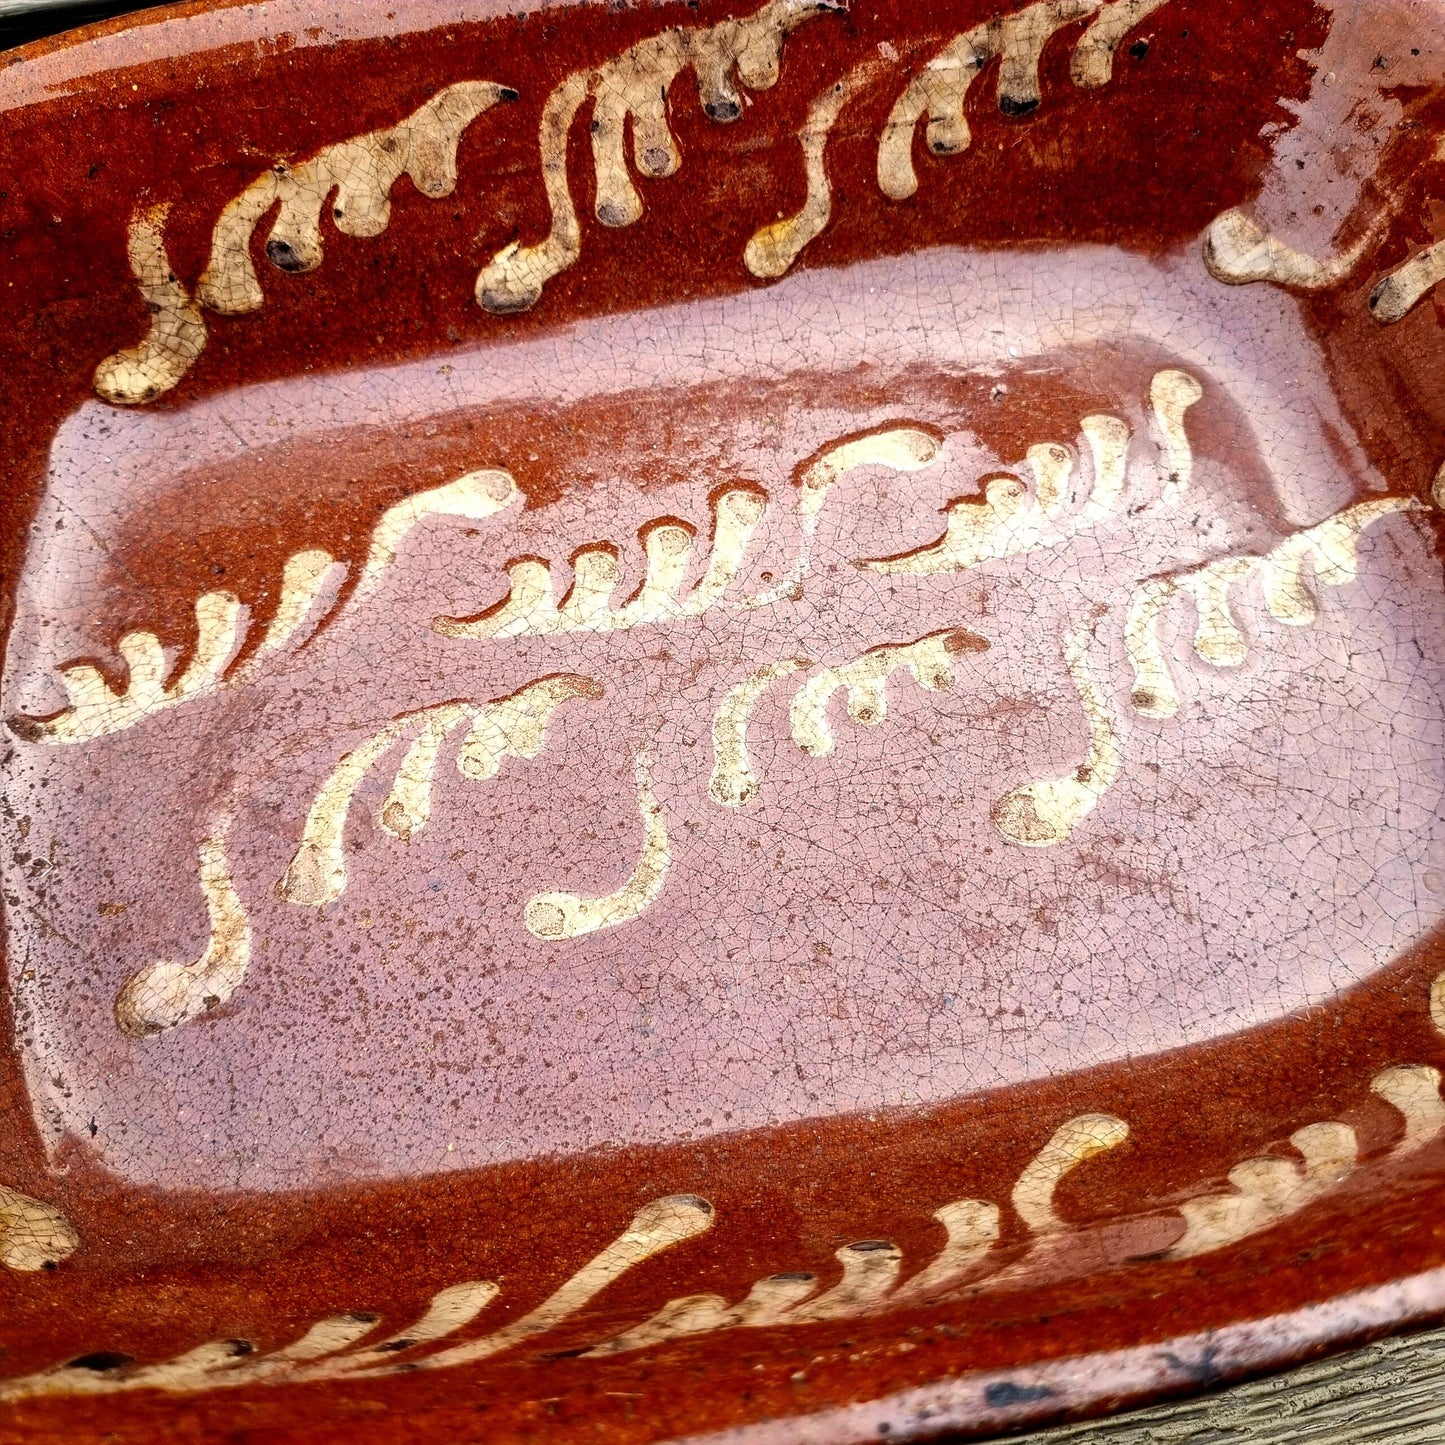 Diminutive Mid 19th Century Welsh Antique Earthenware Buckley Ware Slip Decorated Baking Dish